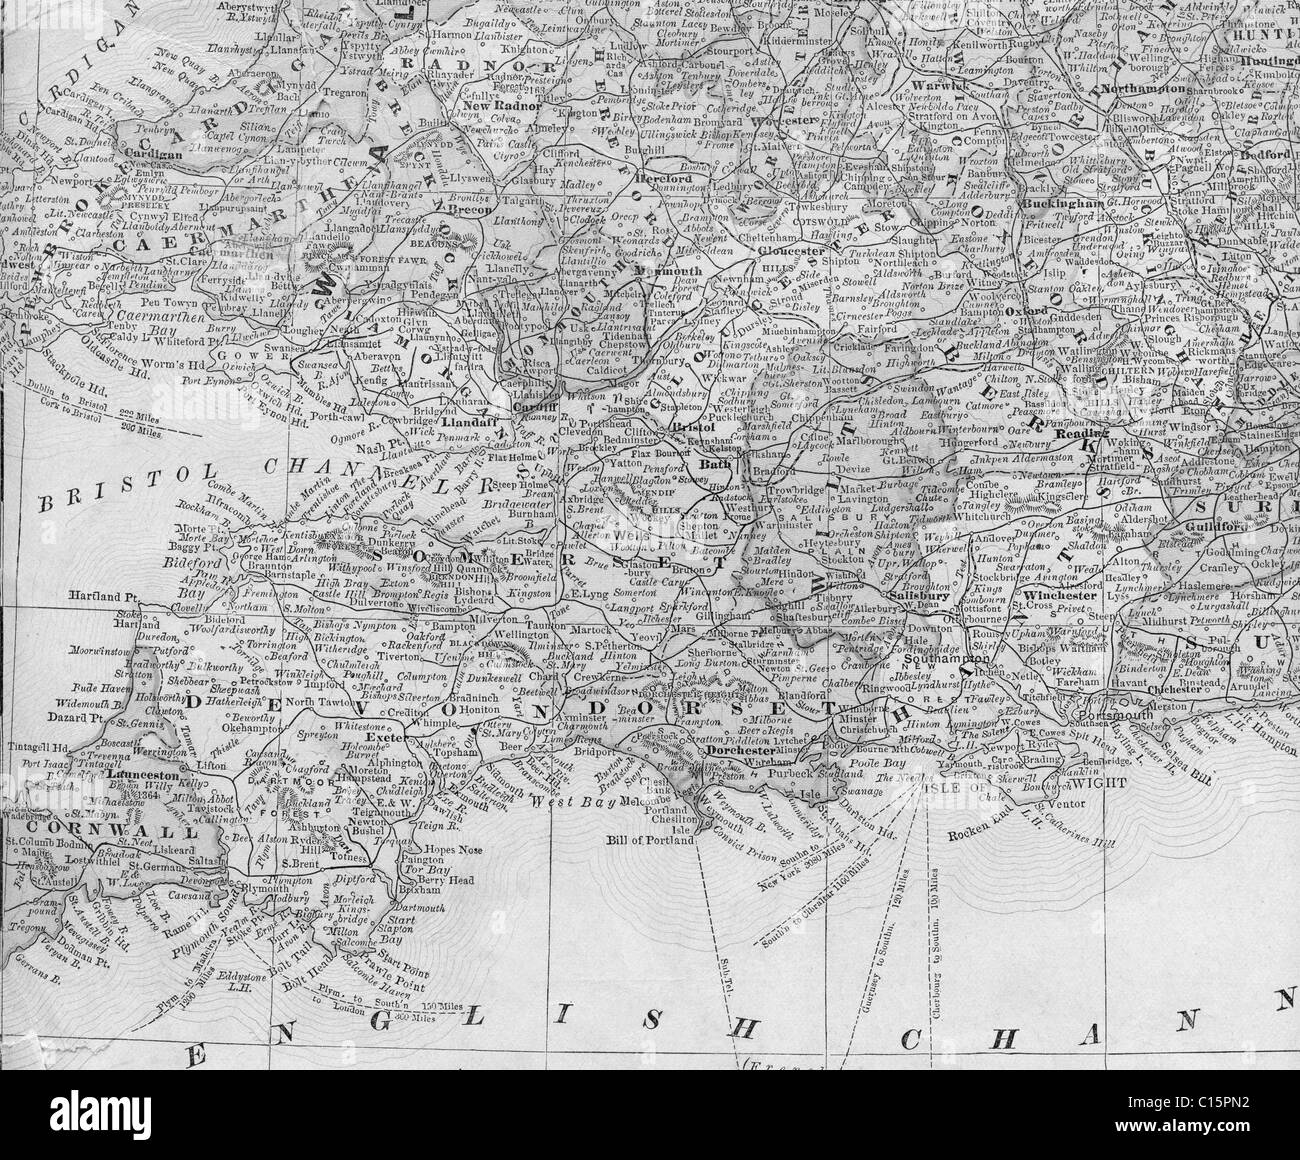 Old map of southwest england from original geography textbook, 1884 Stock Photo